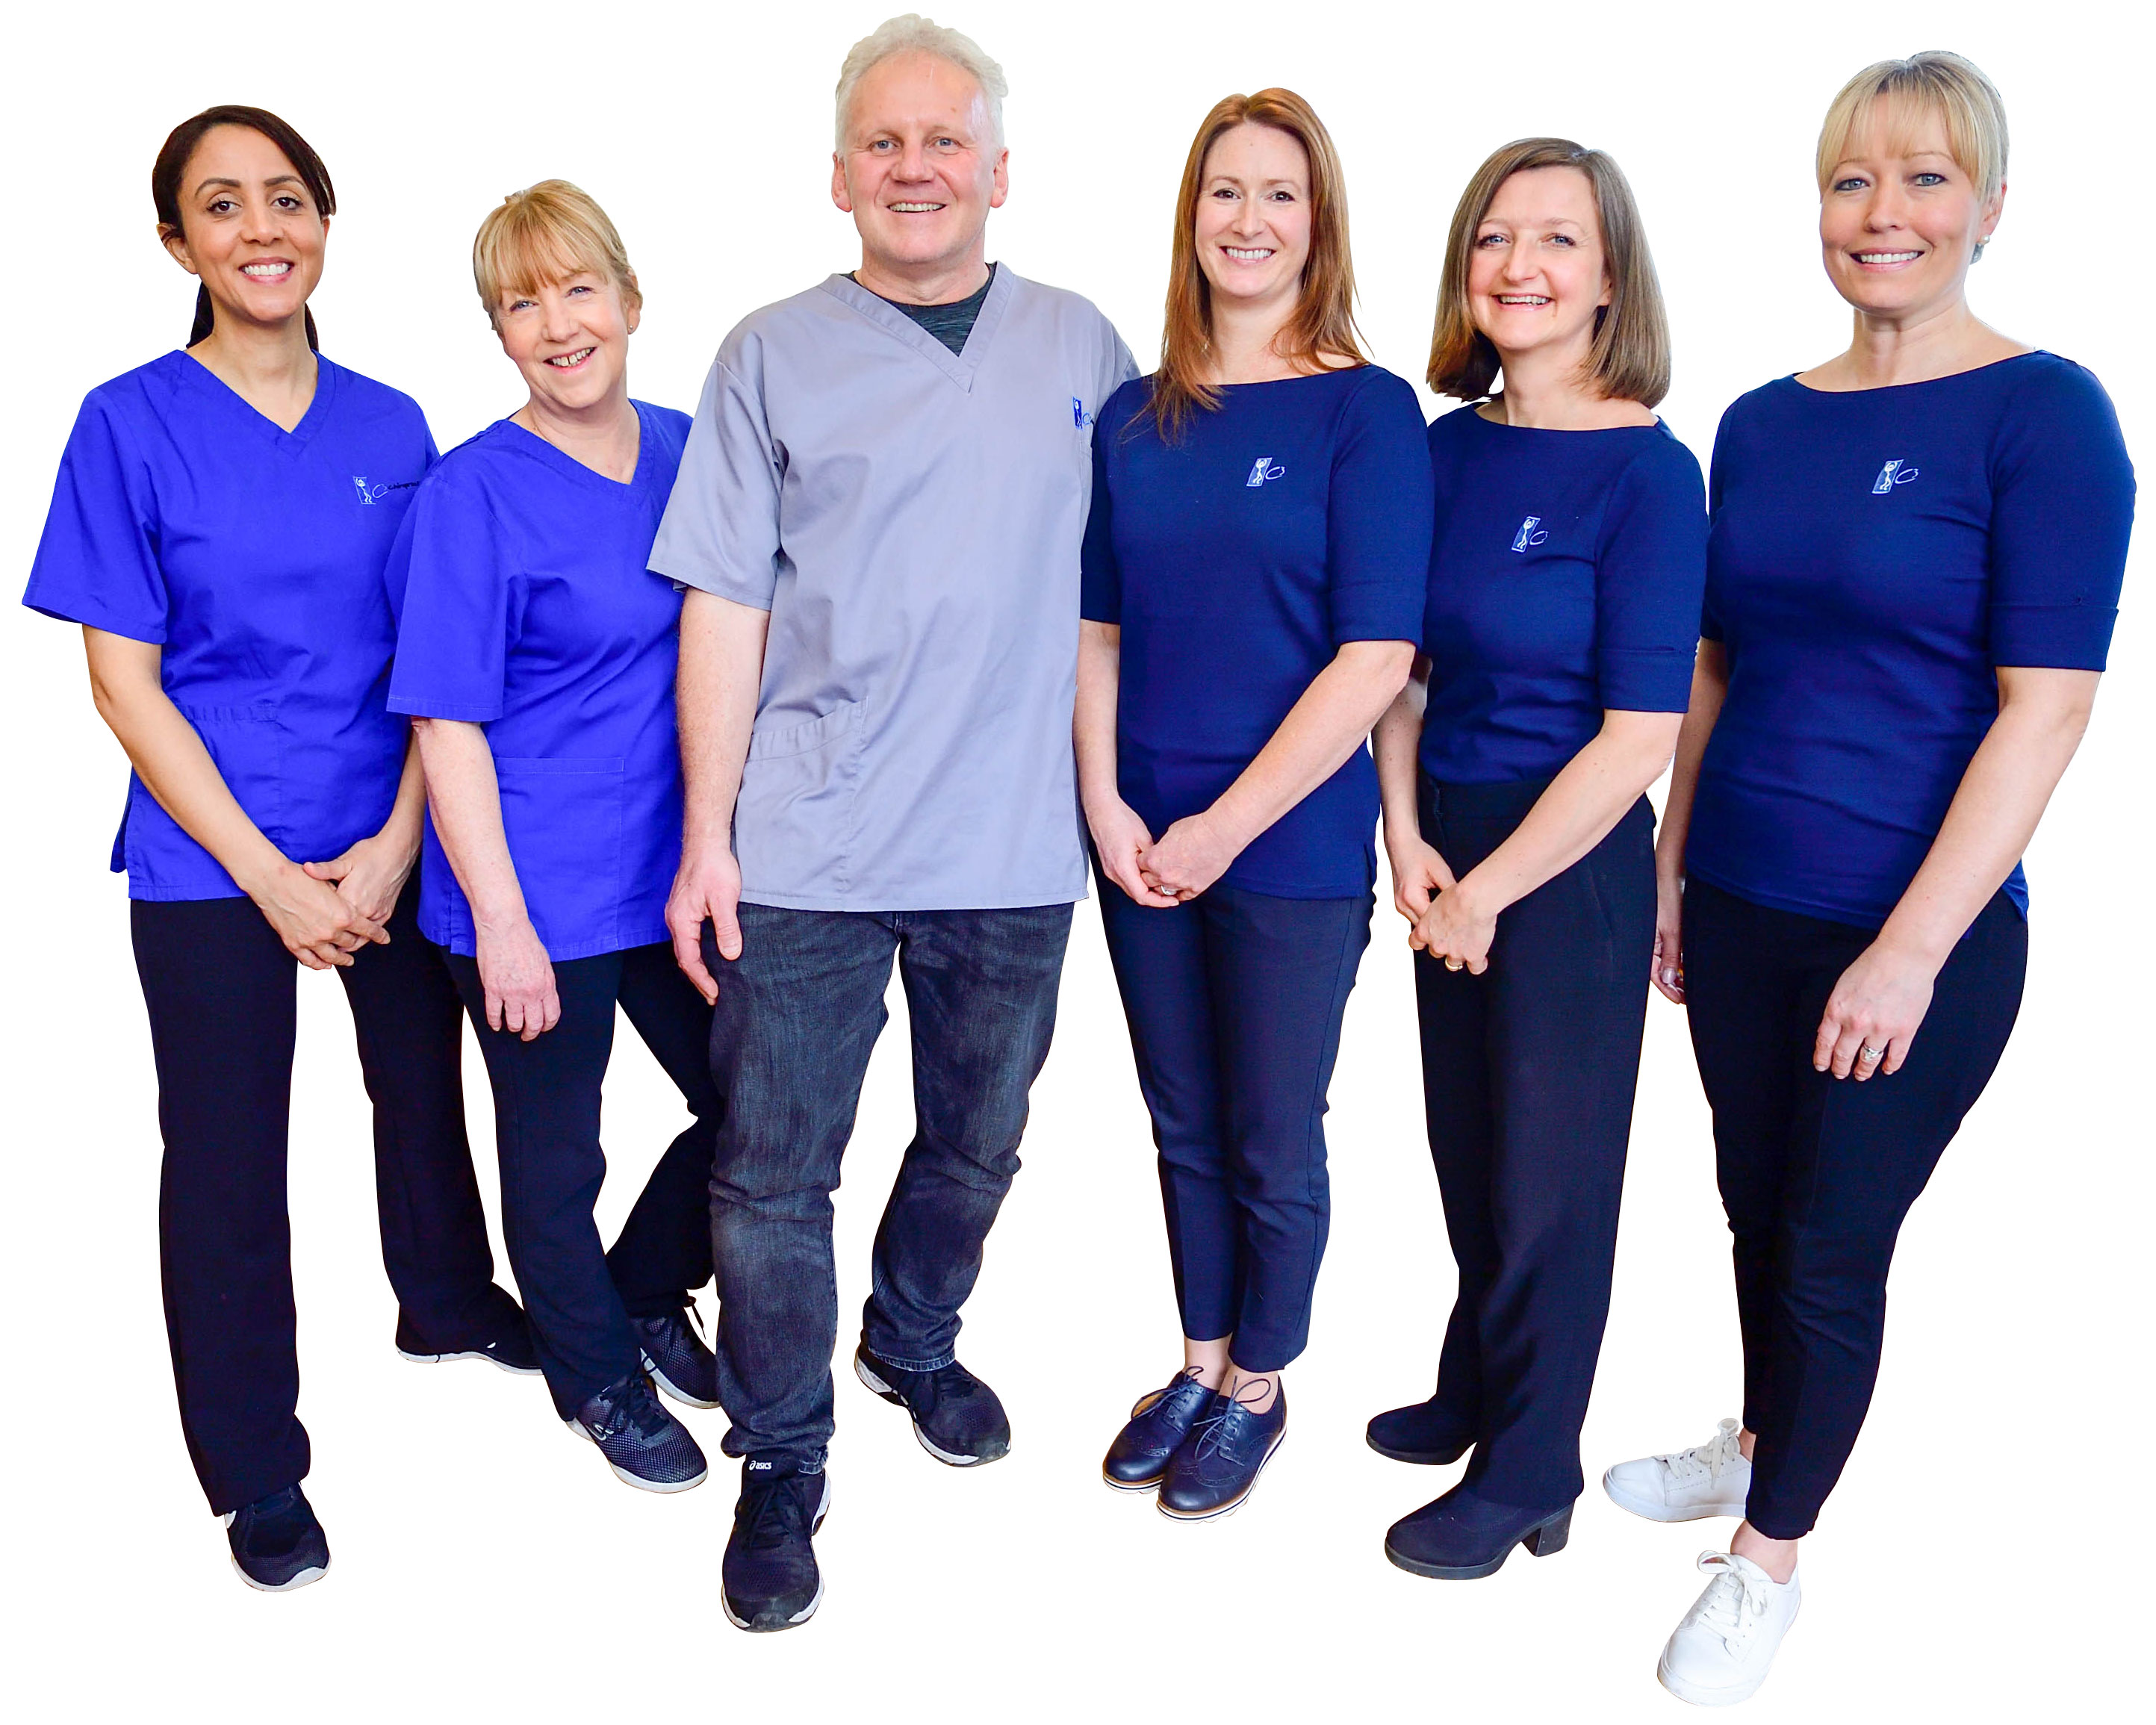 The C3 Chiropractic Team of chiropractors and podiatrists